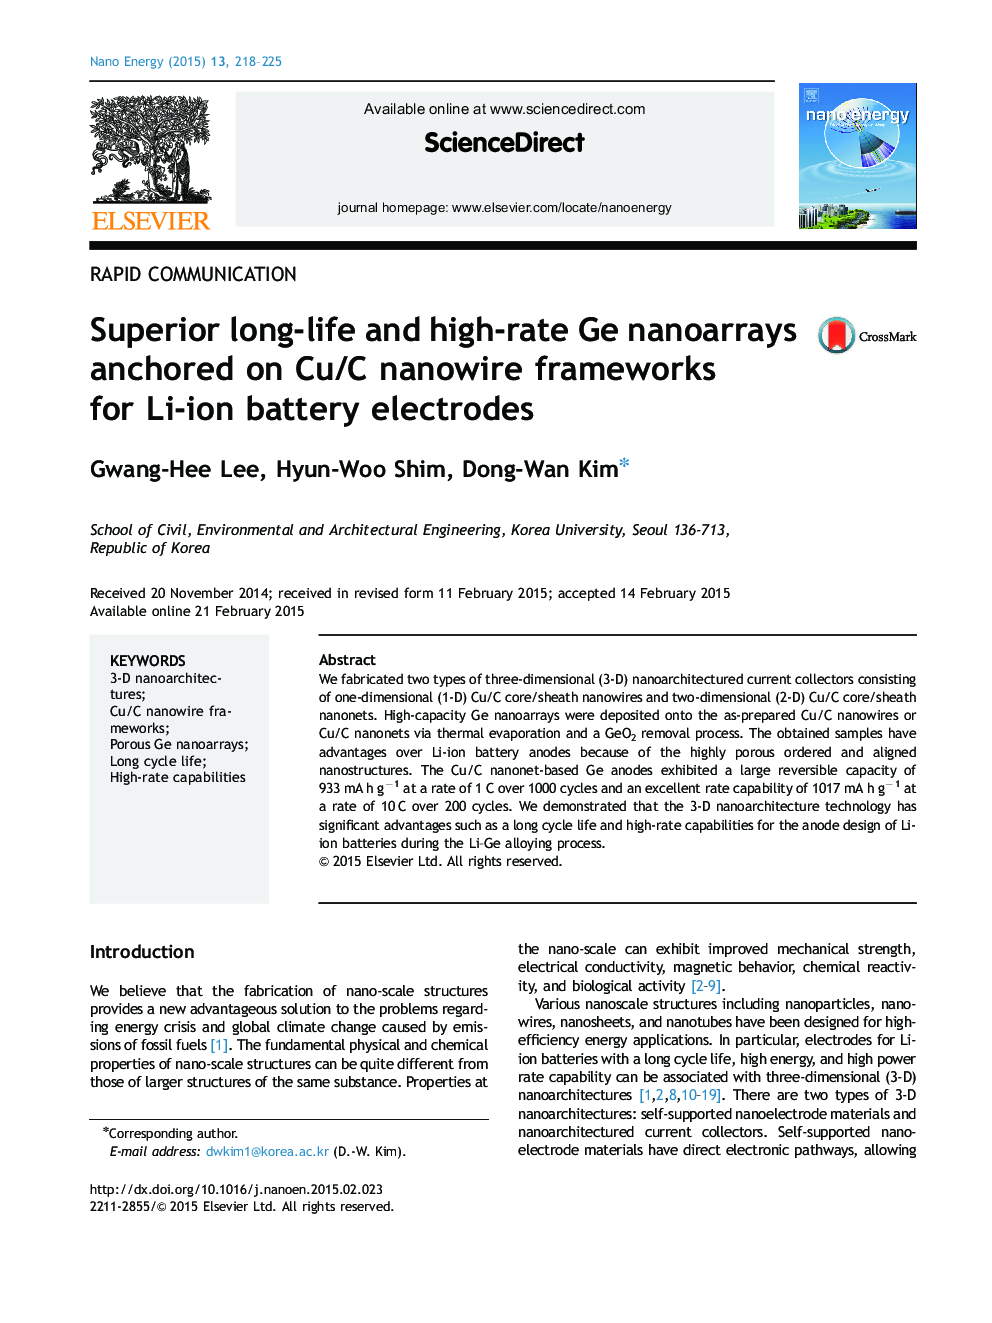 Superior long-life and high-rate Ge nanoarrays anchored on Cu/C nanowire frameworks for Li-ion battery electrodes